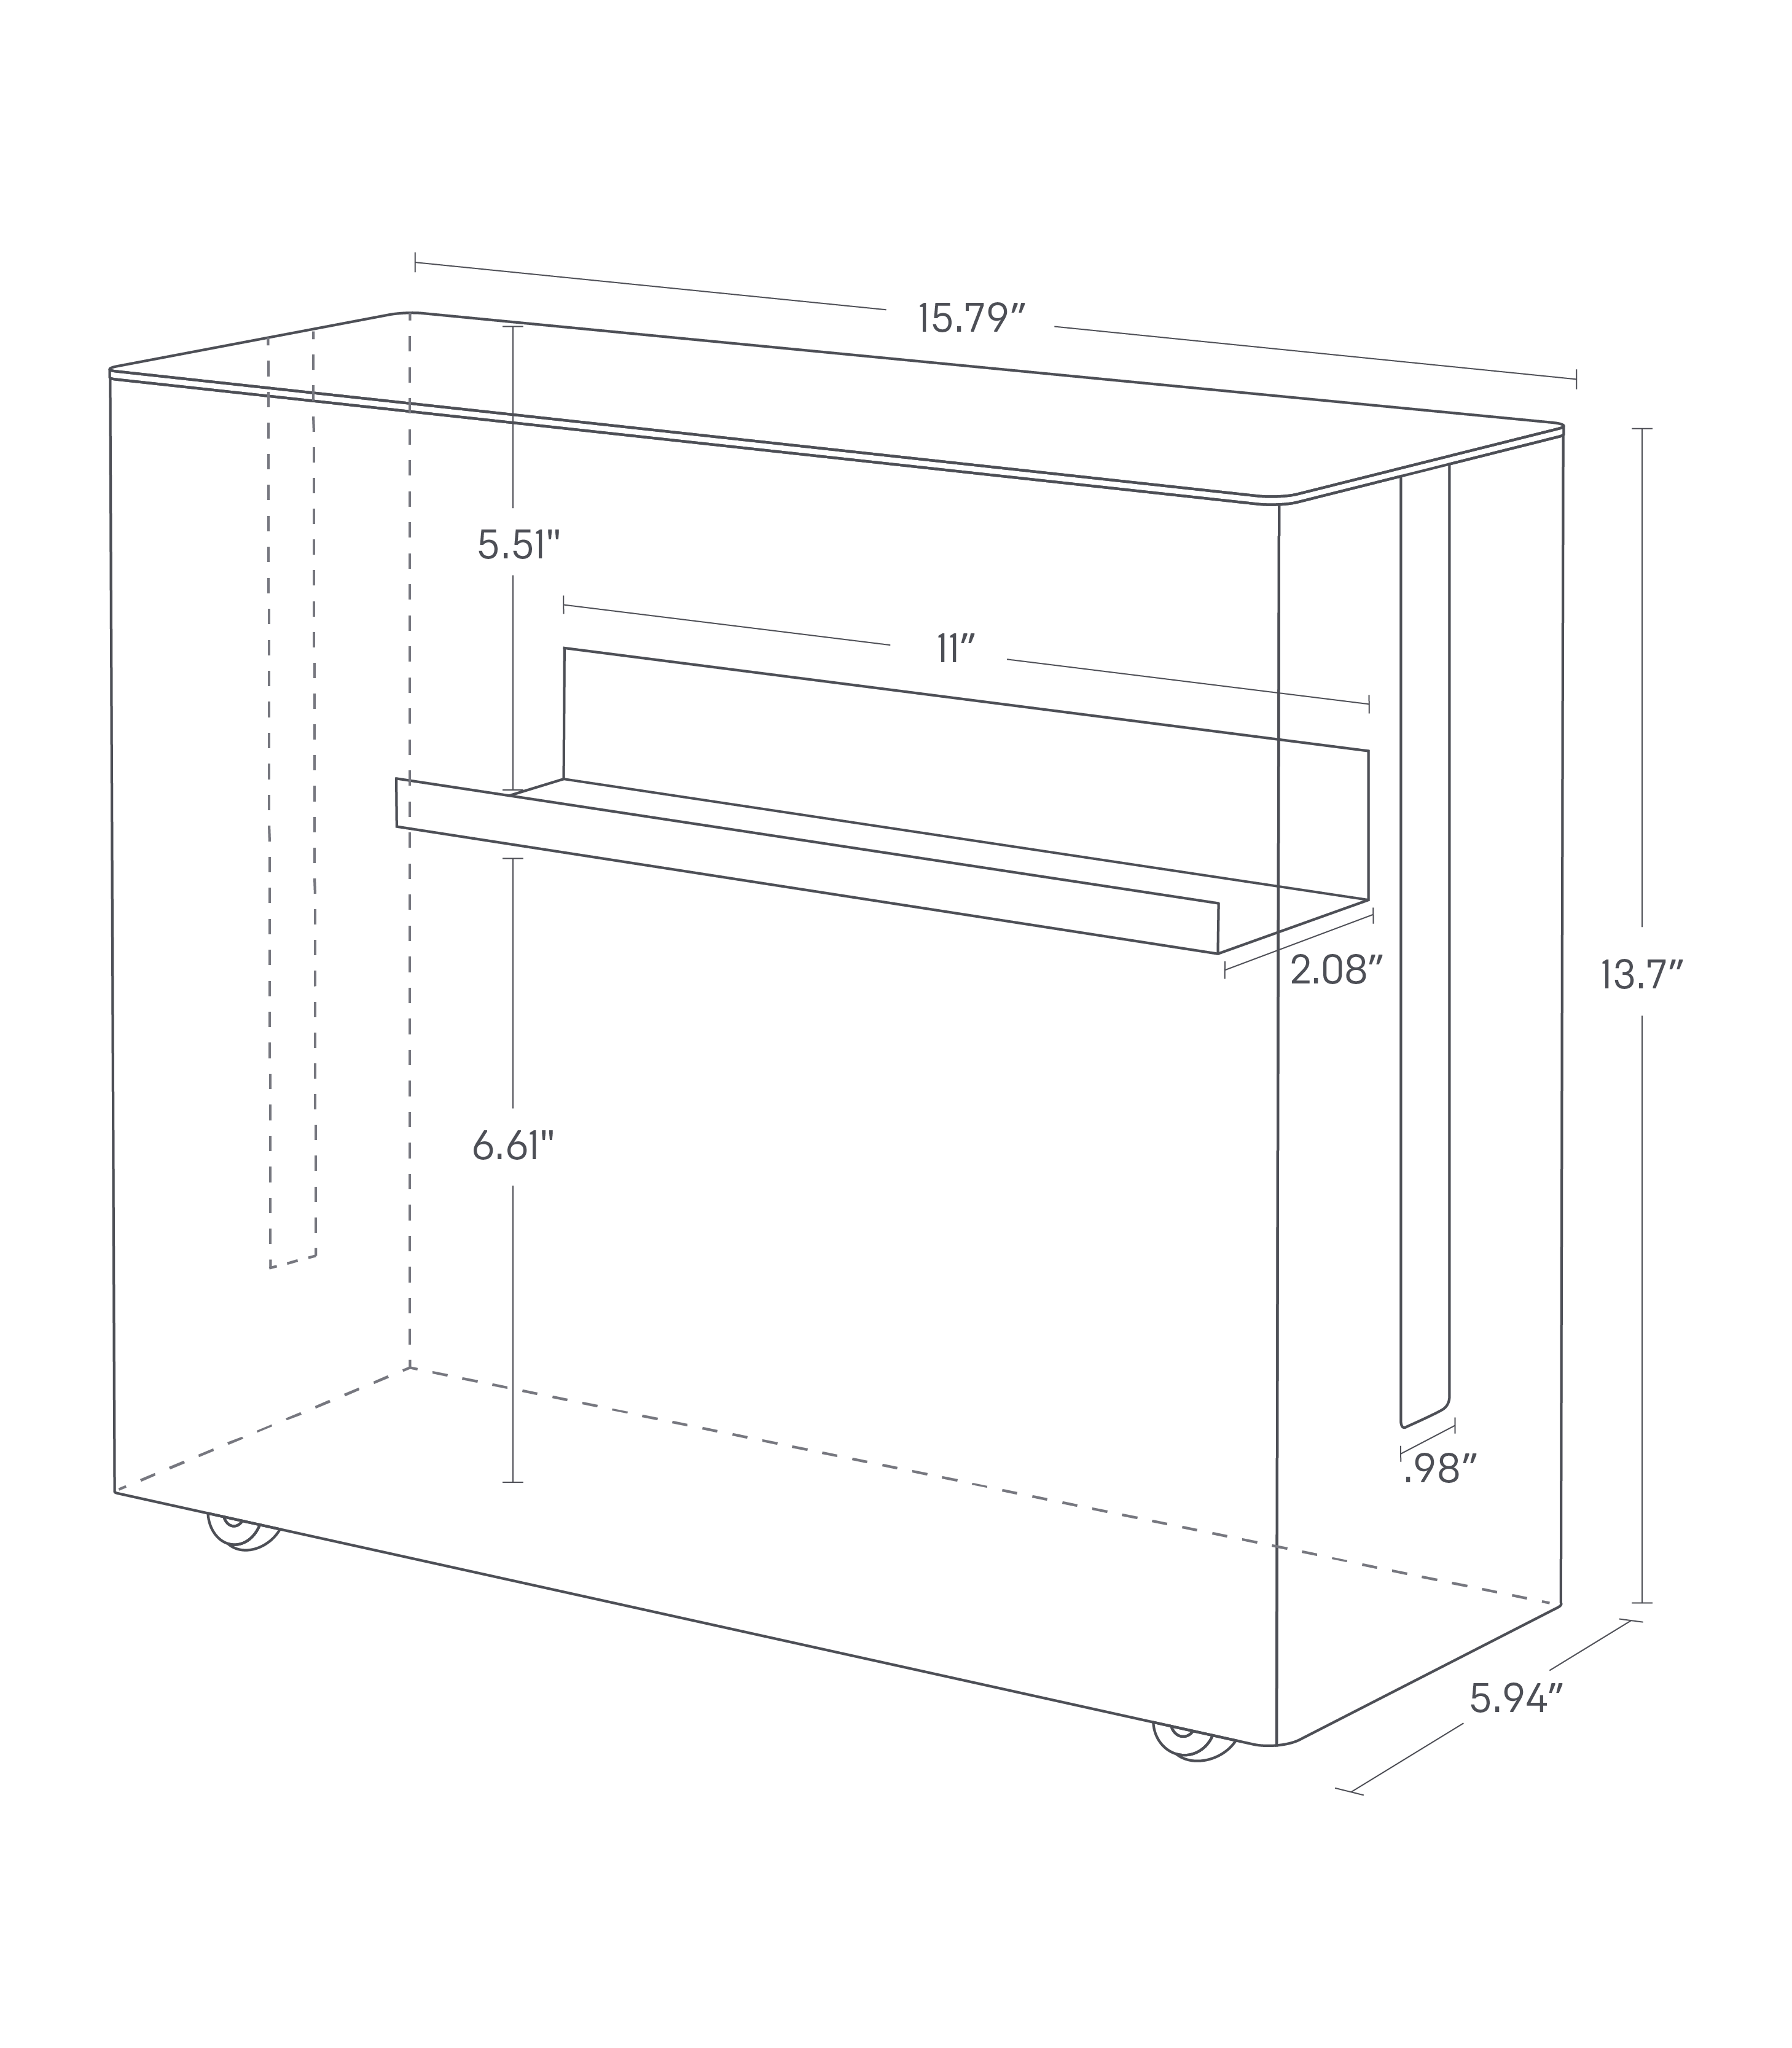 Dimension image for Rolling Cable Management Box showing a total length of 15.79